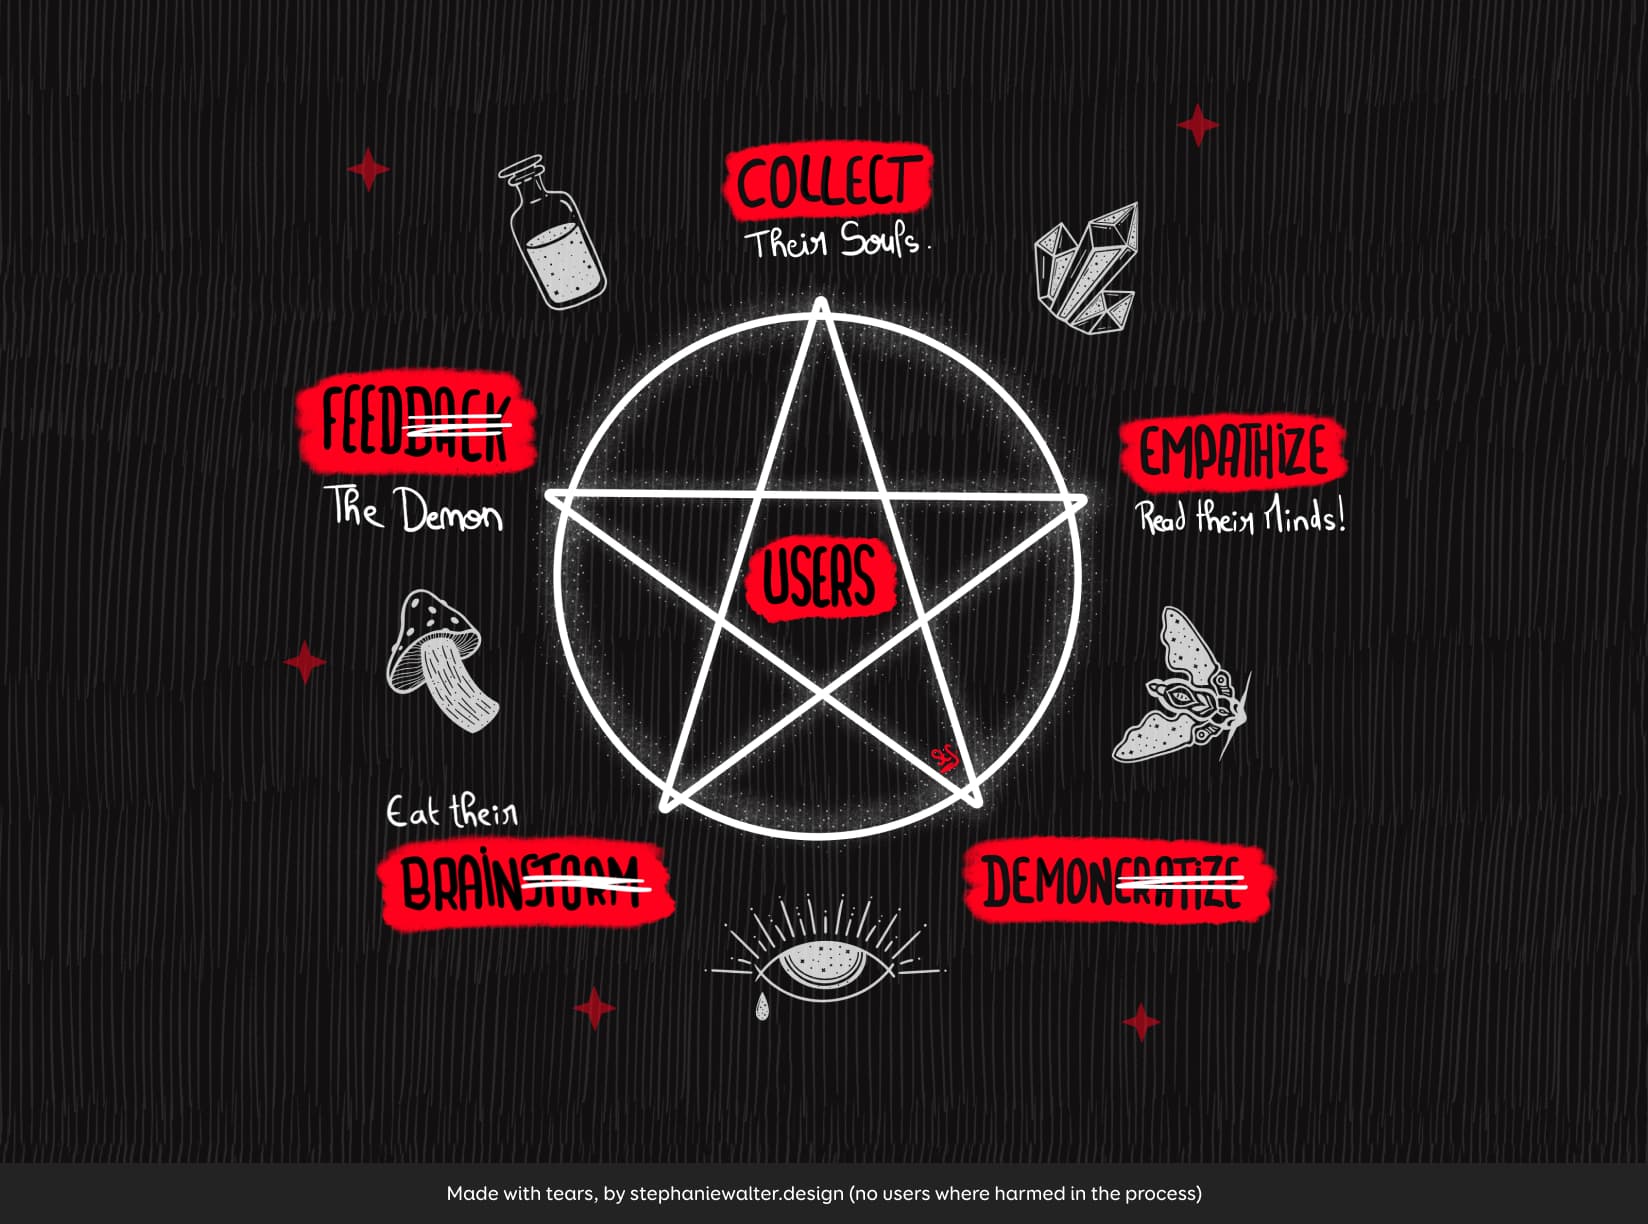 A parody of a design process. There's a white pentacle in the middle on dark background. The word "users" lie in the center of the pentacle. Around it, clockwise, the steps: collect (their souls), empathize (read their minds!), demon(cratize), eat their brain(storm), feed(back) the demon.